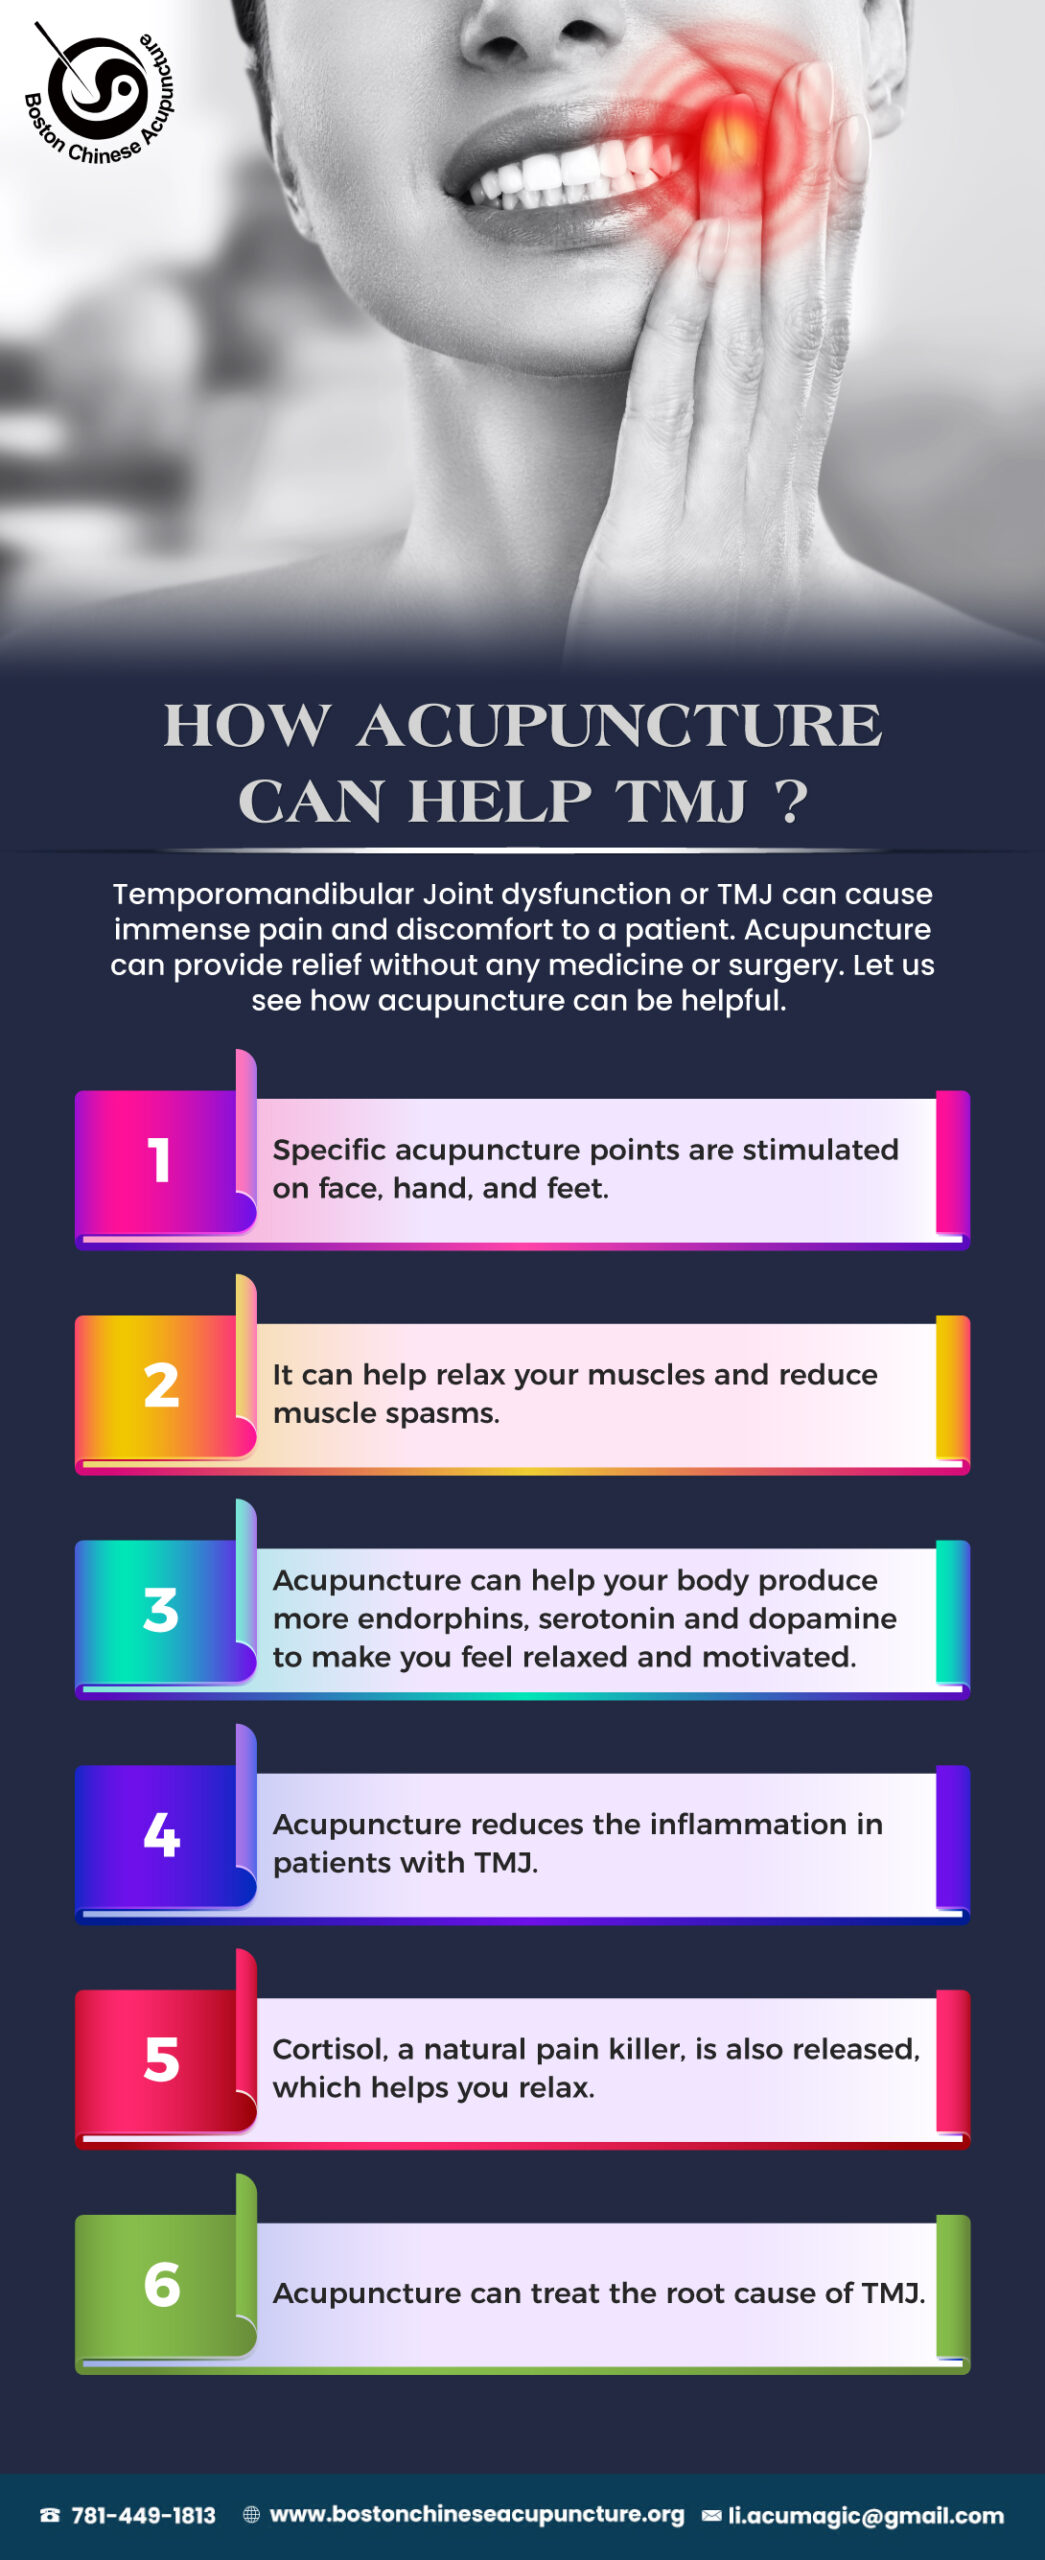 Acupuncture and TMJ